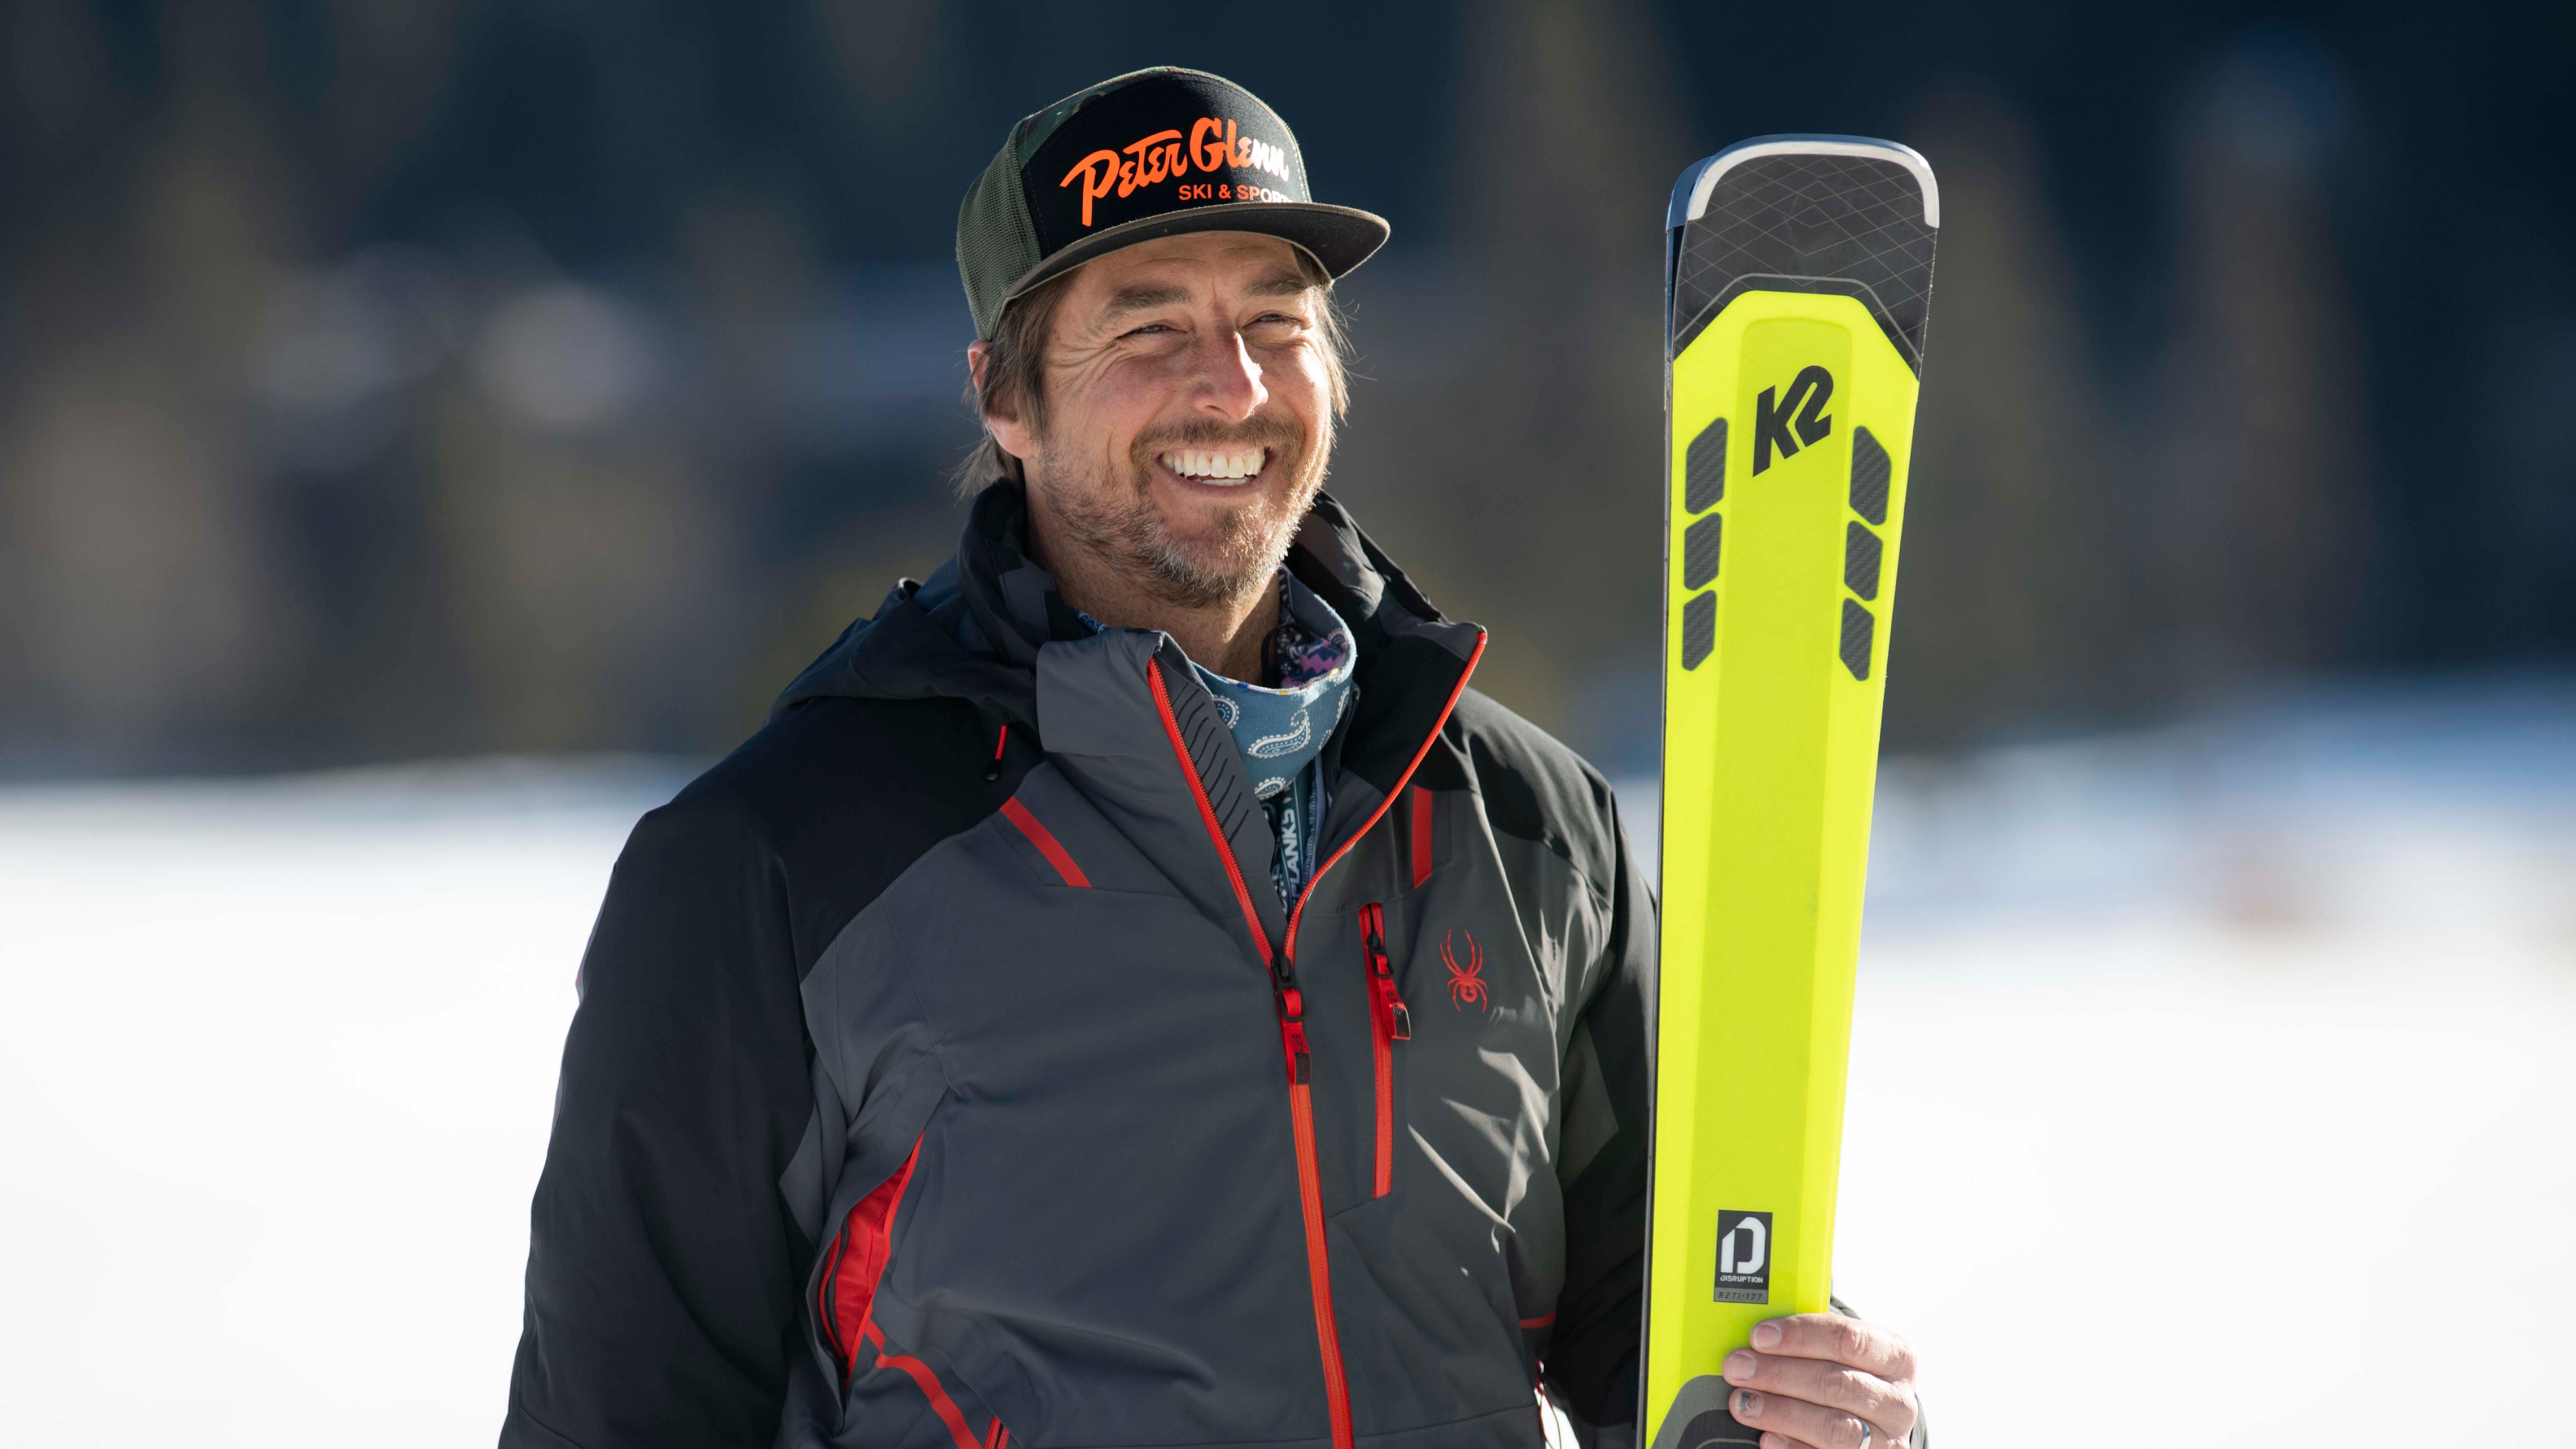 Palisades Tahoe athlete and Olympic Gold medalist Jonny Moseley